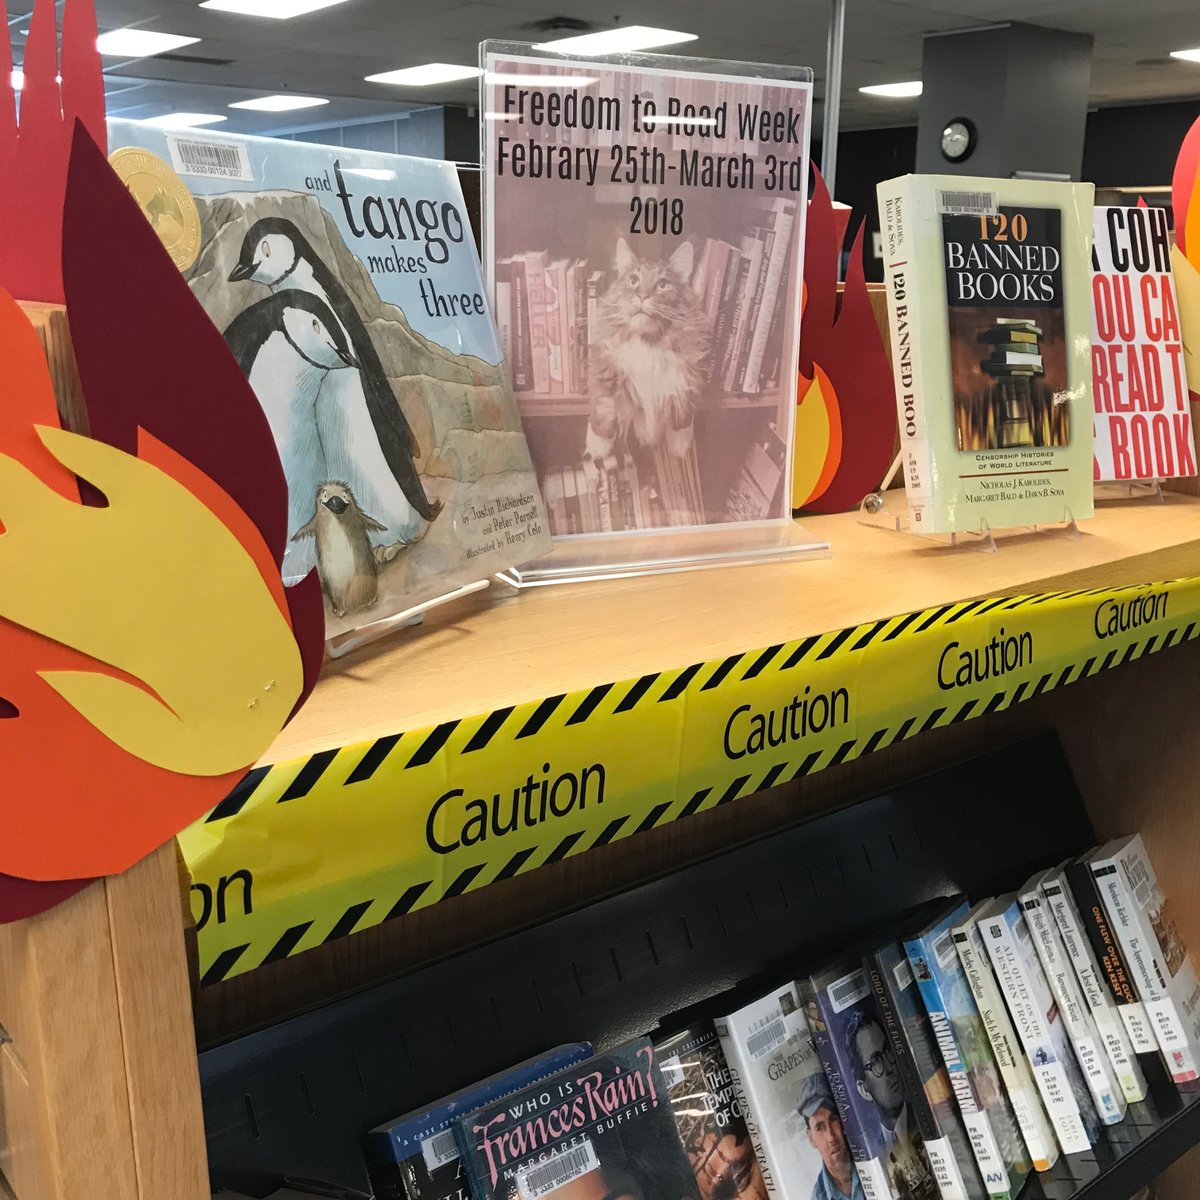 “Banning books gives us silence when we need speech. It closes our ears when we need to listen. It makes us blind when we need sight.” ― Stephen Chbosky

Celebrate your freedom to read by checking out some of these banned and challenged books. #FreedomToRead #FTRWeek